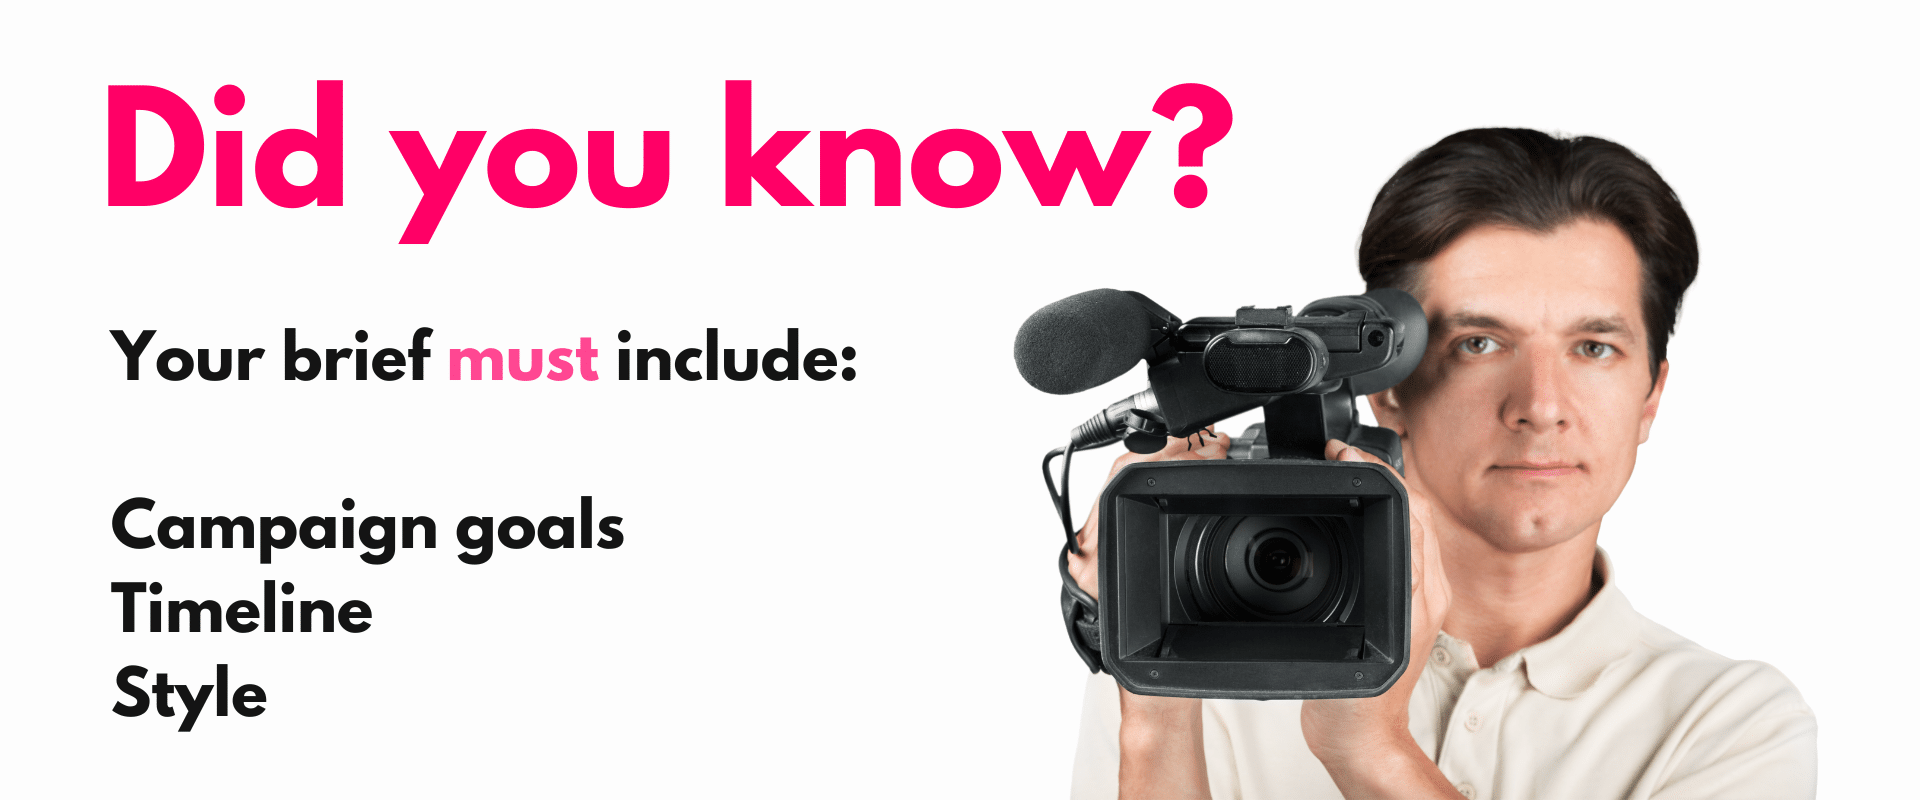 Influencer marketing brief: A man holding a camera with the words did you know?.